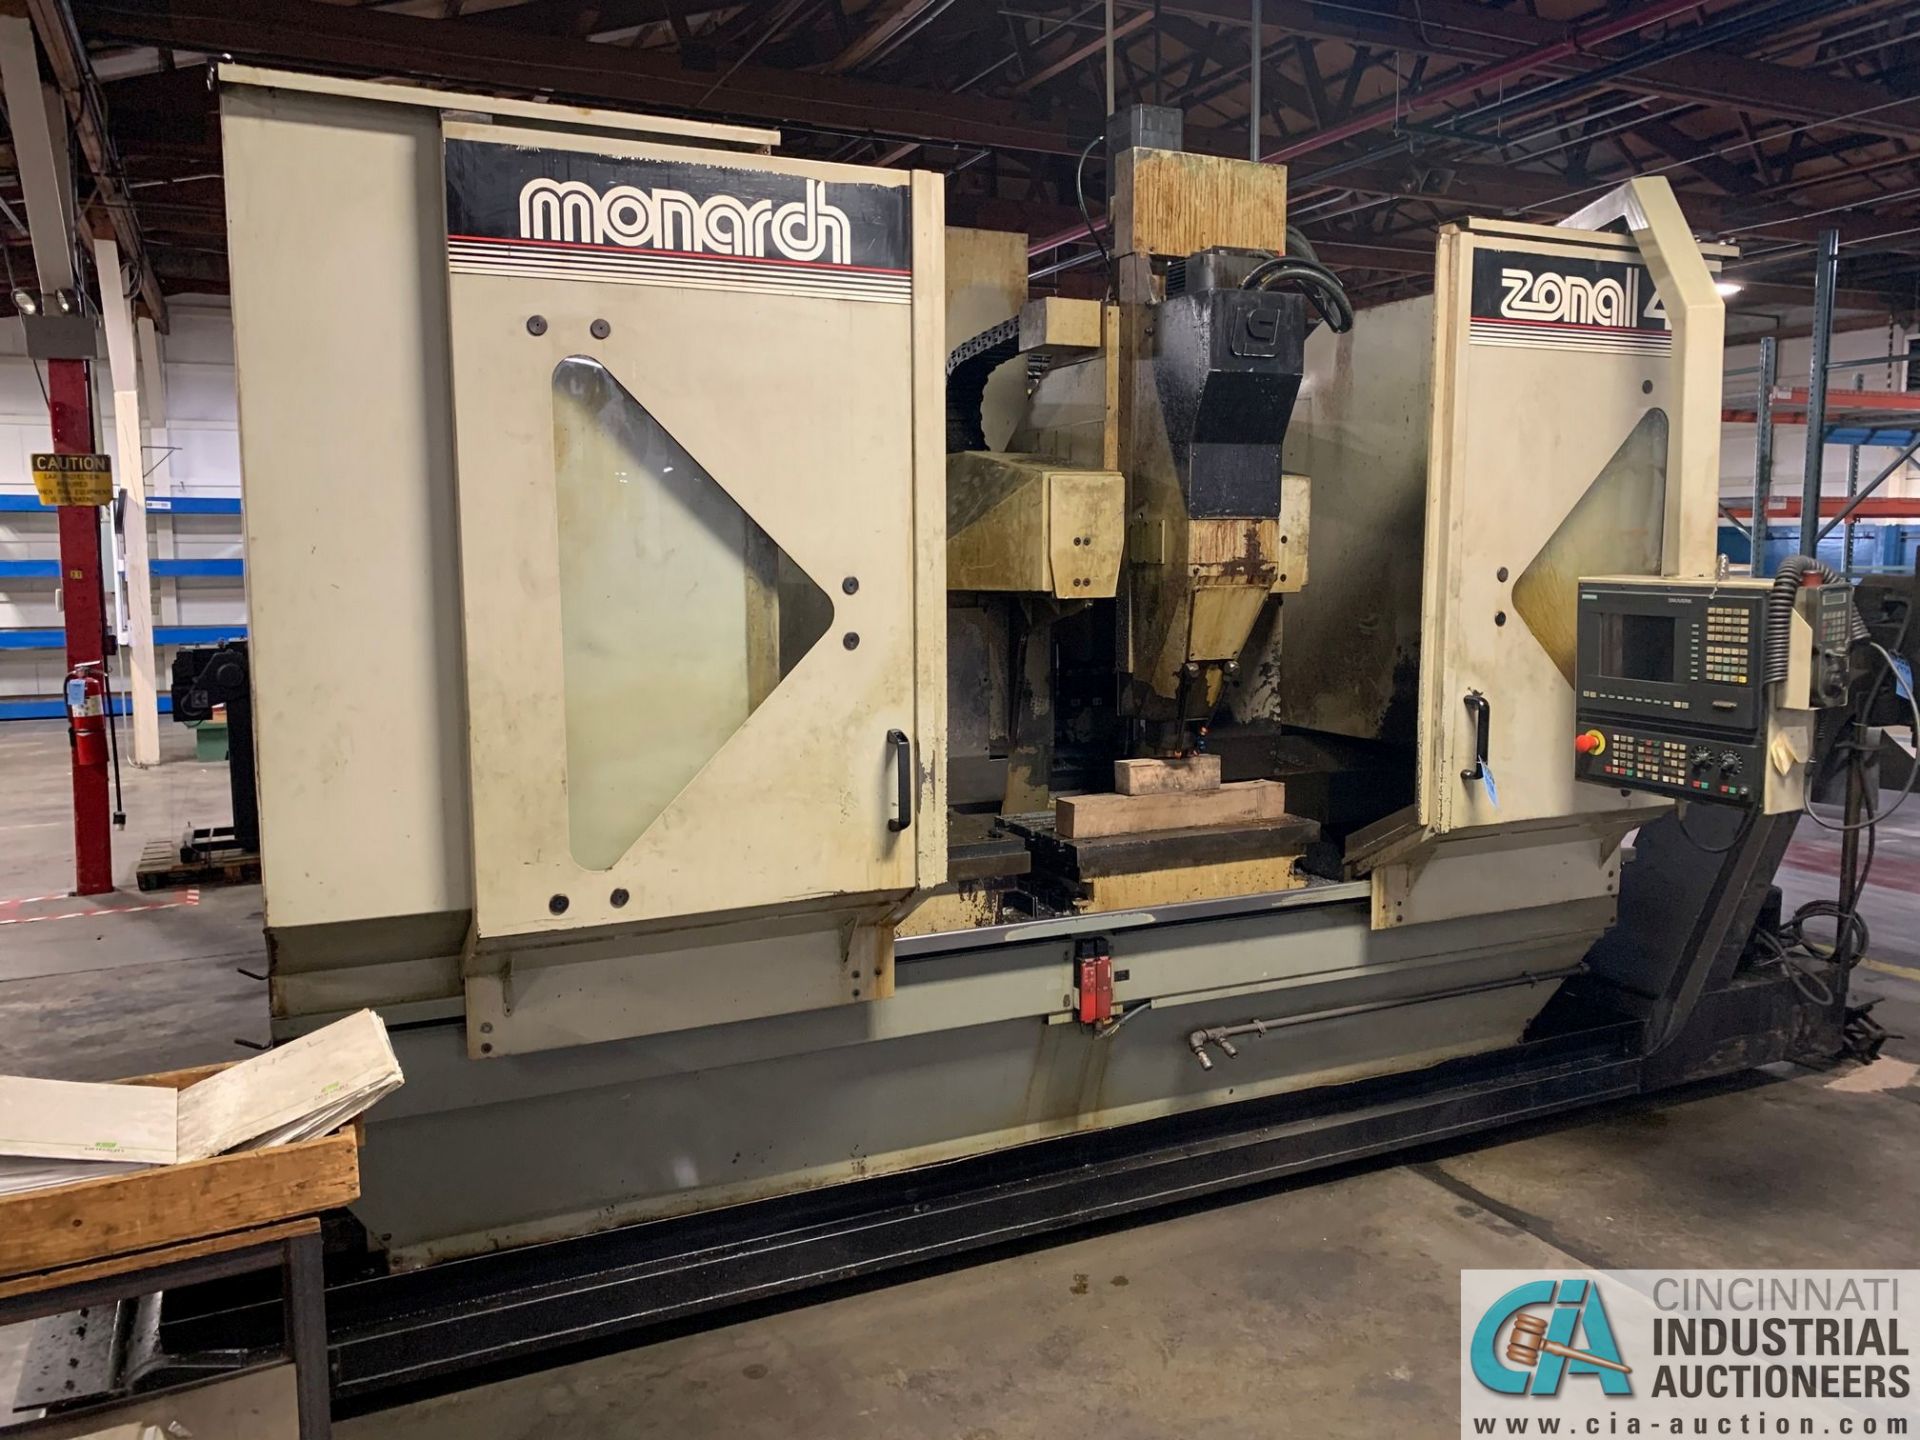 MONARCH UNISIGN TYPE UNIVERS 4 ZONALL 4 CNC VERTICAL MACHINING CENTER; S/N 99Z403, NO. 4293,